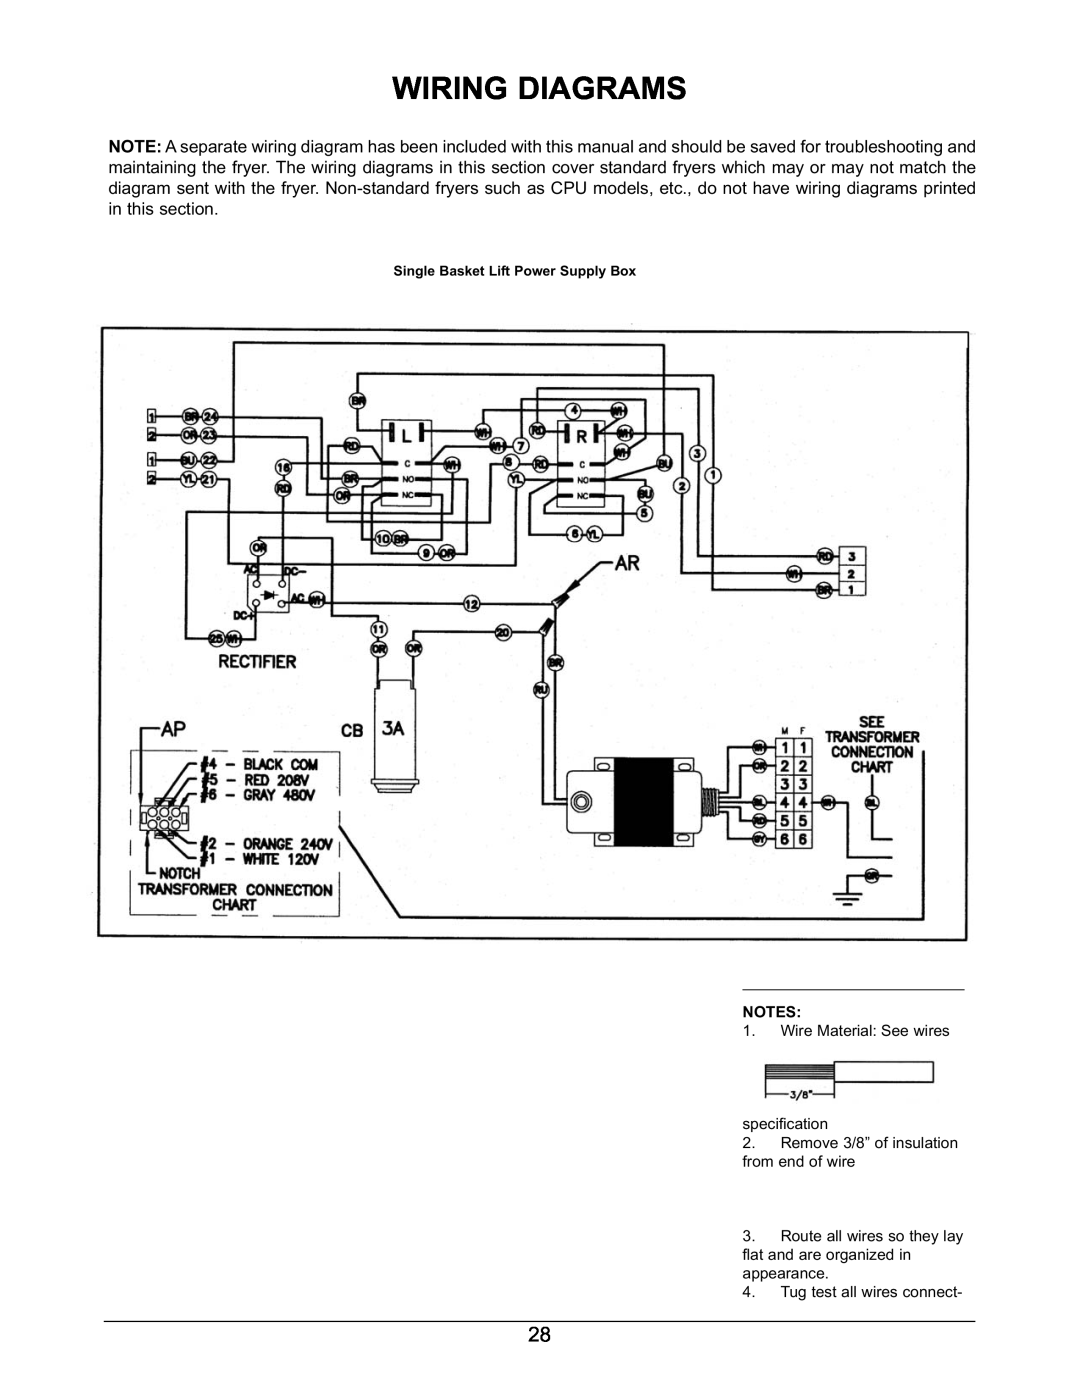 Keating Of Chicago 2006 warranty Wiring Diagrams 